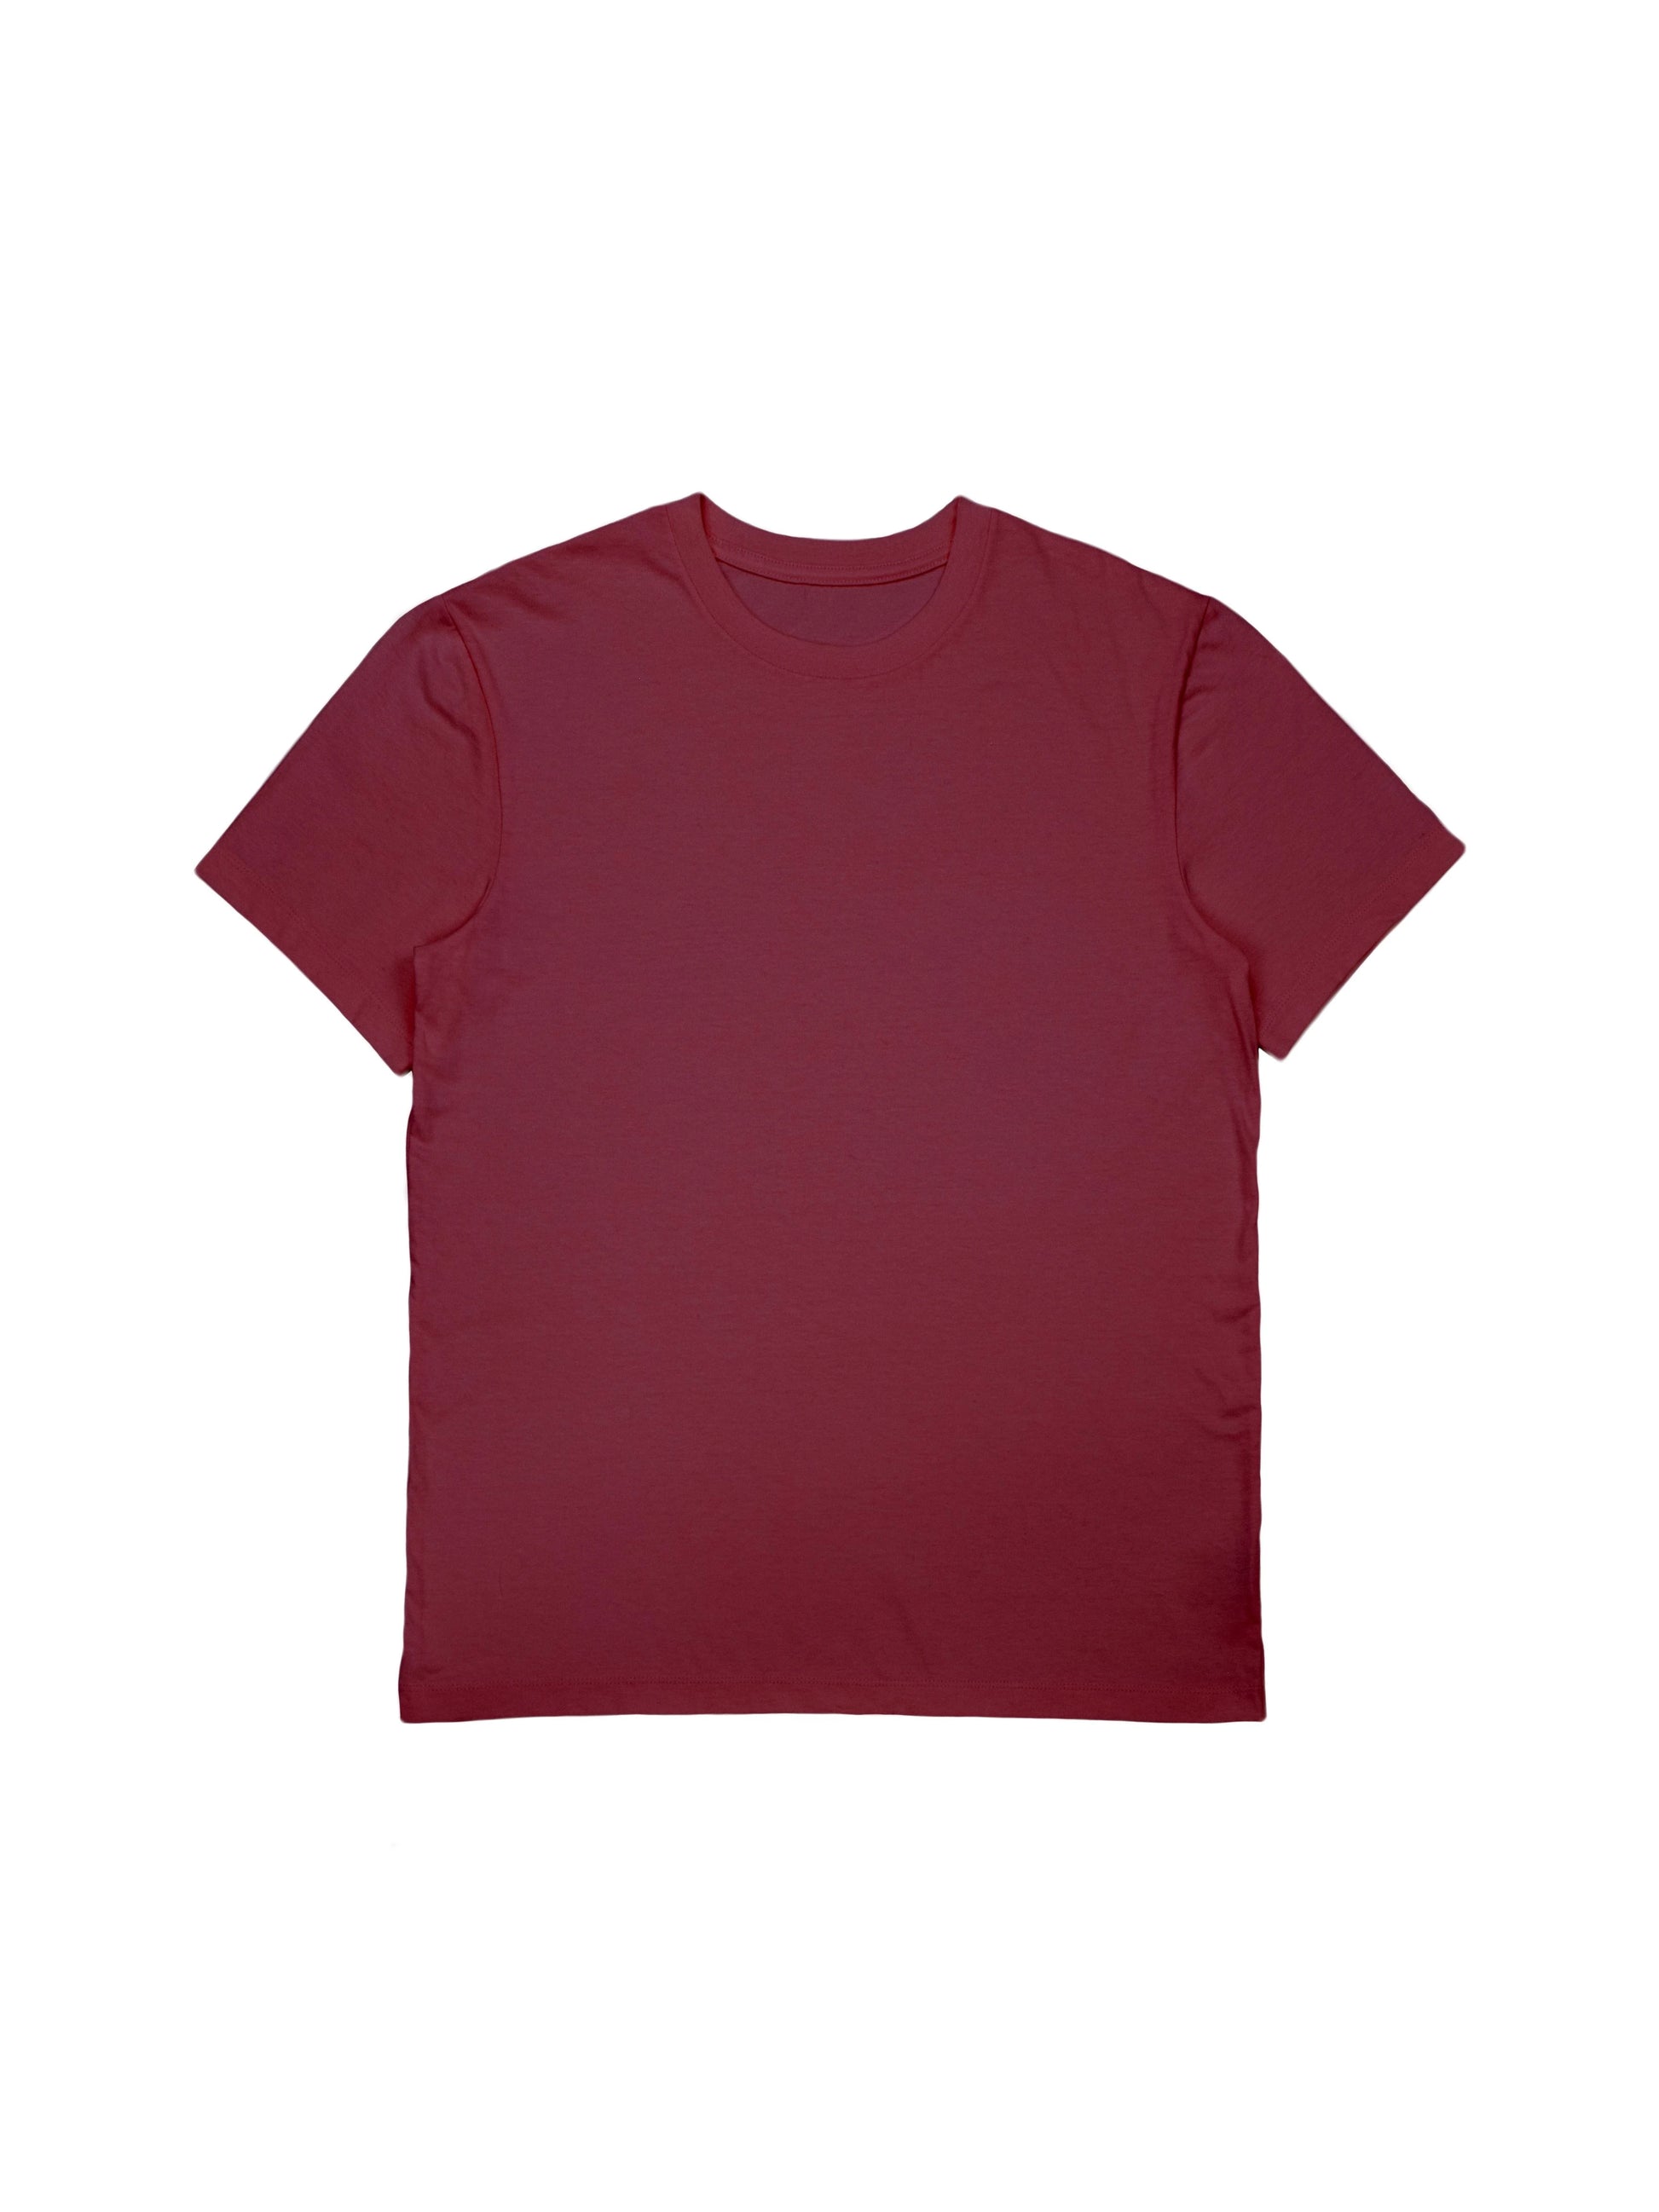 Boxy Fit Burgundy T-Shirt Essential - 100% Organic Cotton Made In Canada M